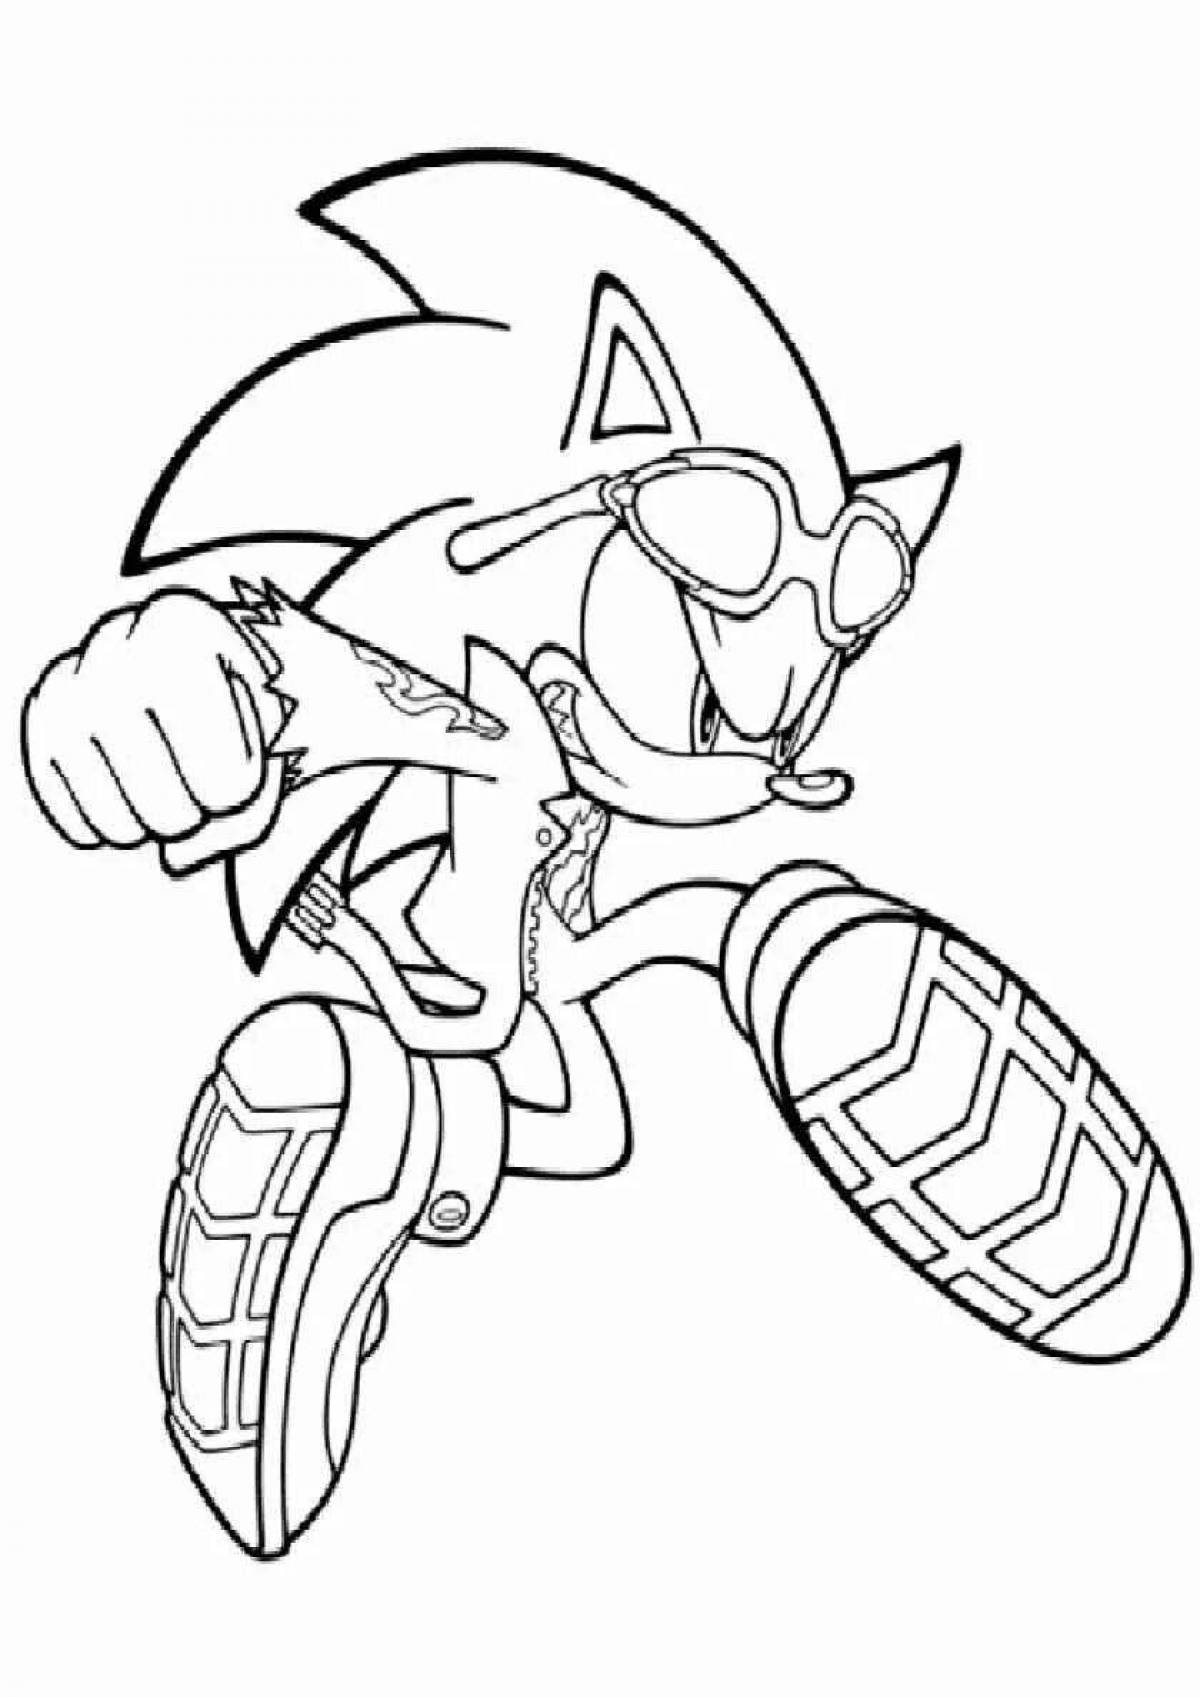 Amazing sonic shredder coloring page